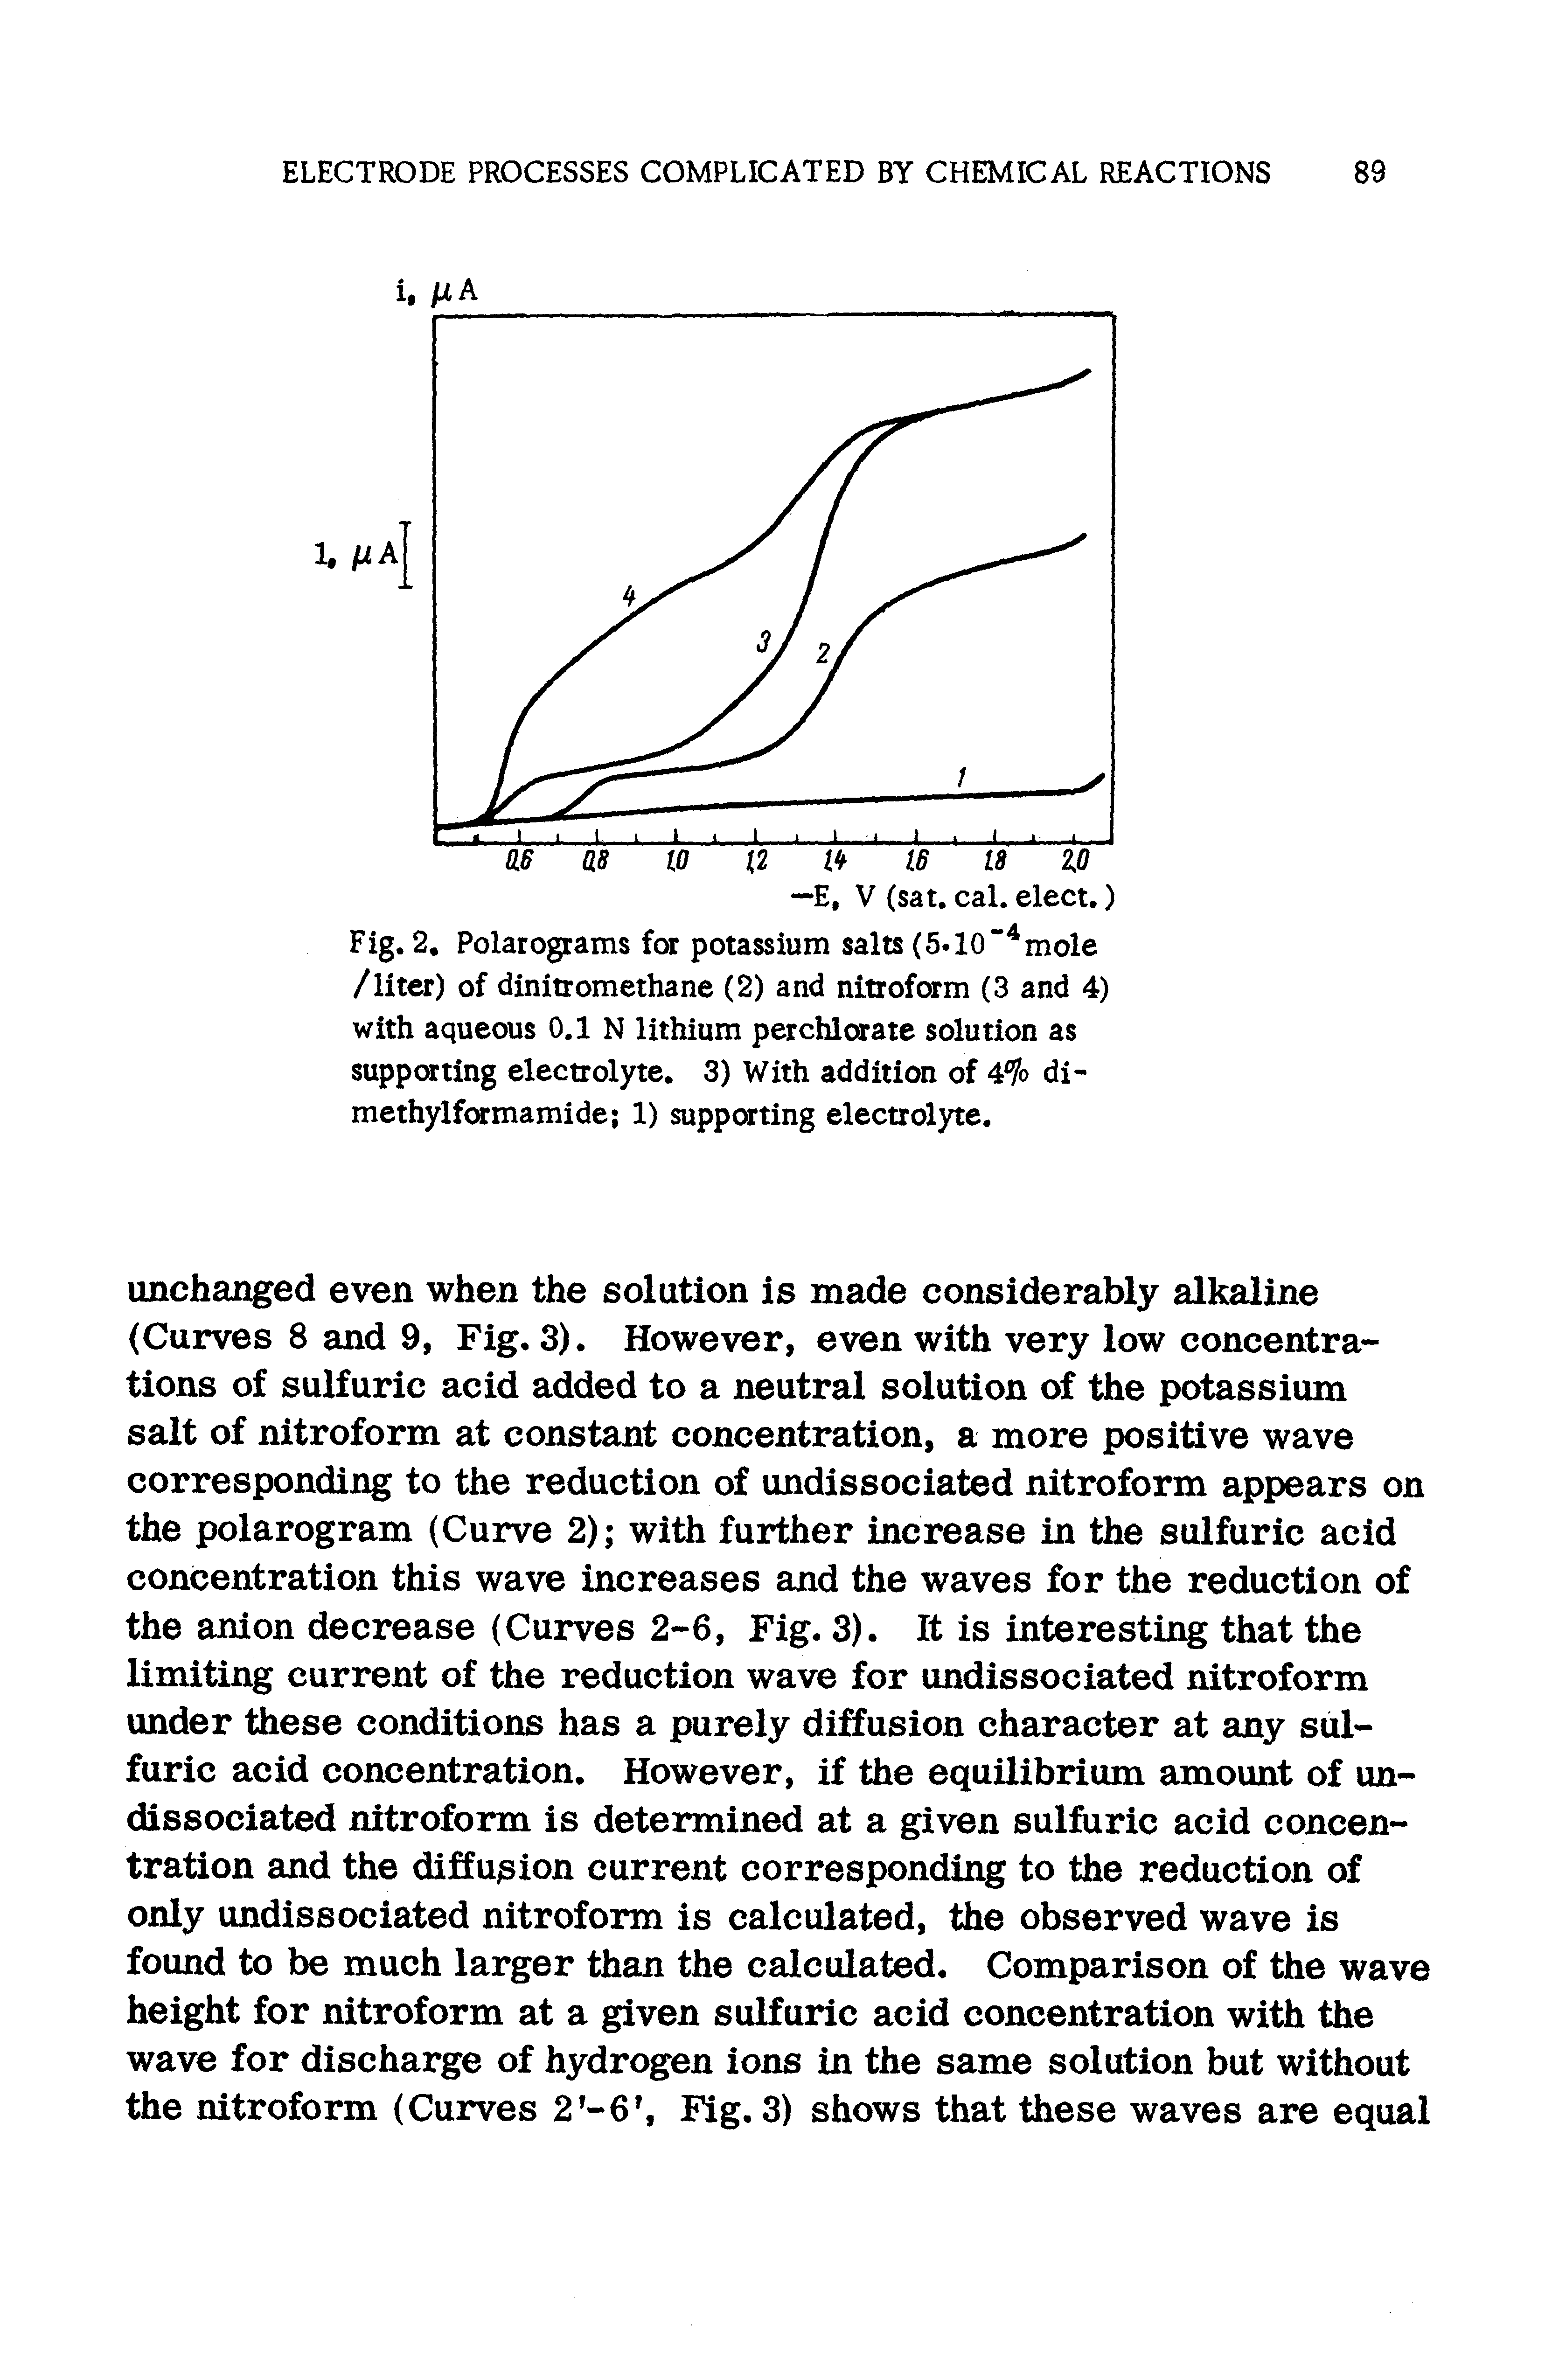 Fig. 2, Polarogtams fot potassium salts (5 10" mole /liter) of dinitiomethane (2) and nltrofcvm (3 and 4) with aqueous 0.1 N lithium perchlorate solution as suppcsting electrolyte. 3) With addition of di-methylfamamide 1) supporting electrol3rte.